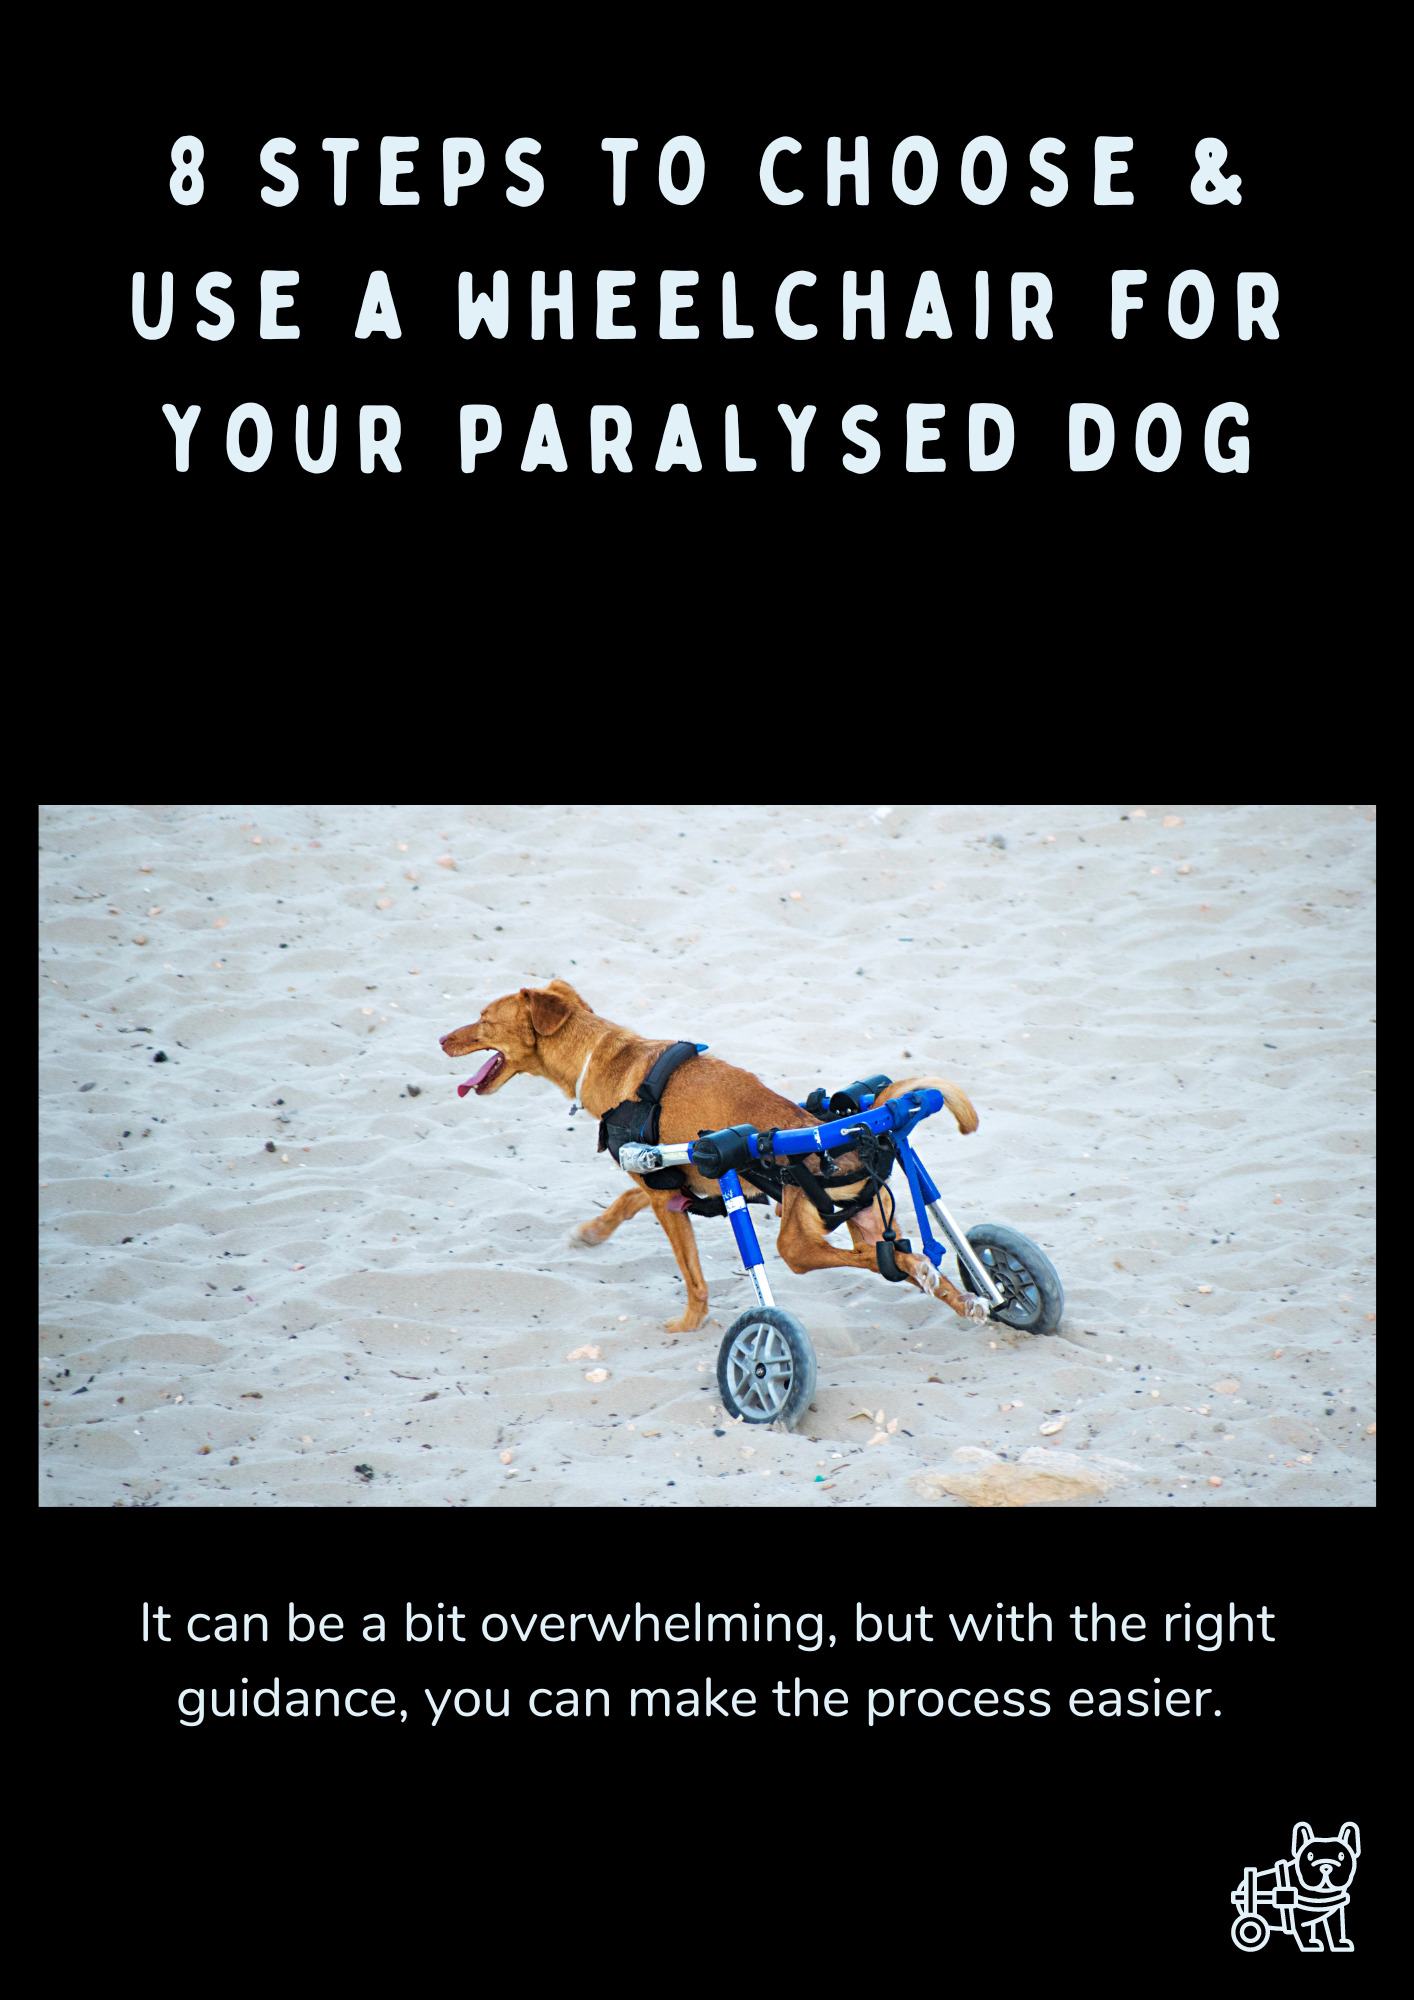 how to choose & use a wheelchair for my dog